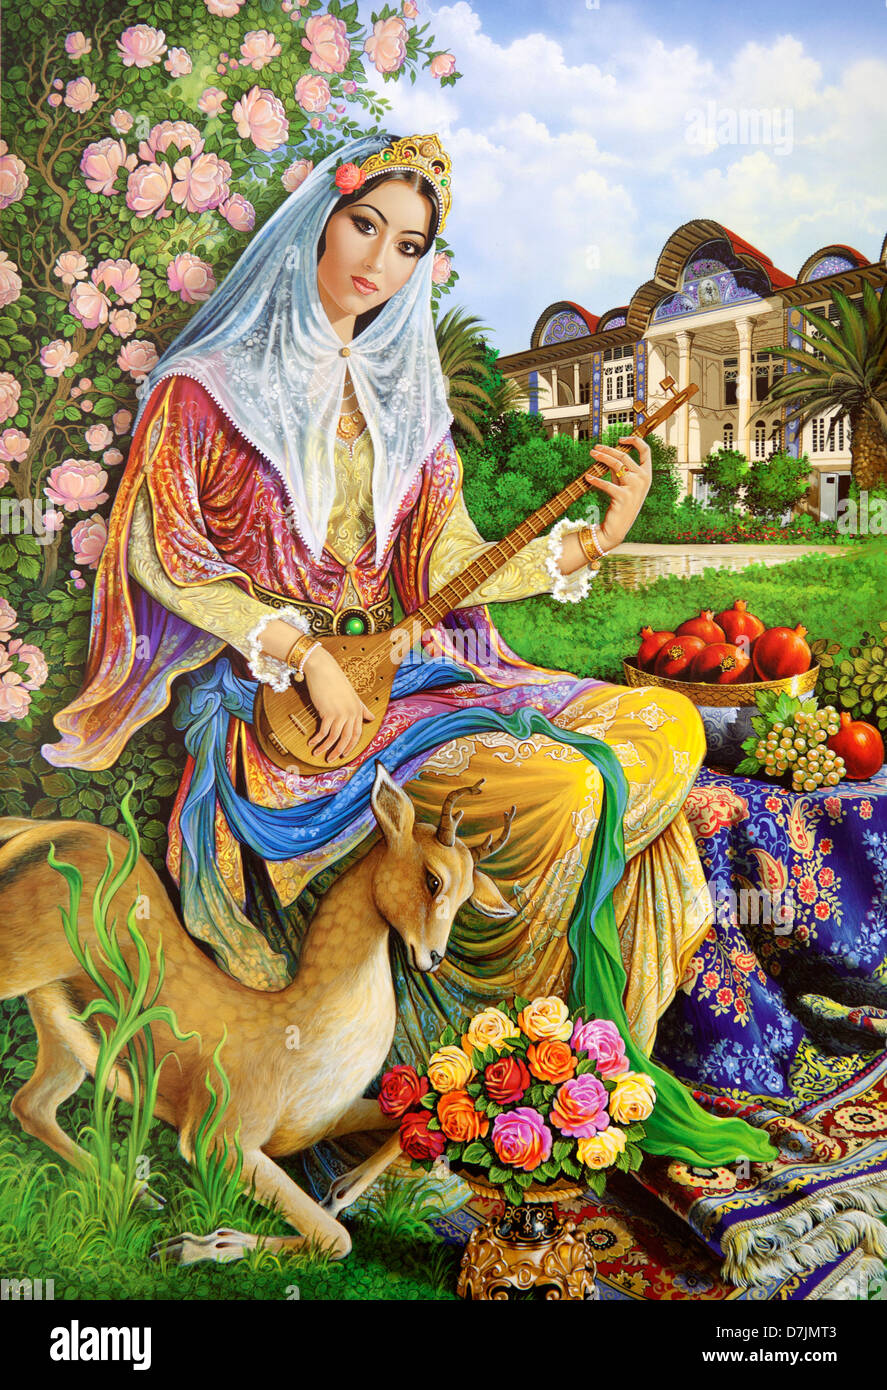 poster of an afghan woman Stock Photo